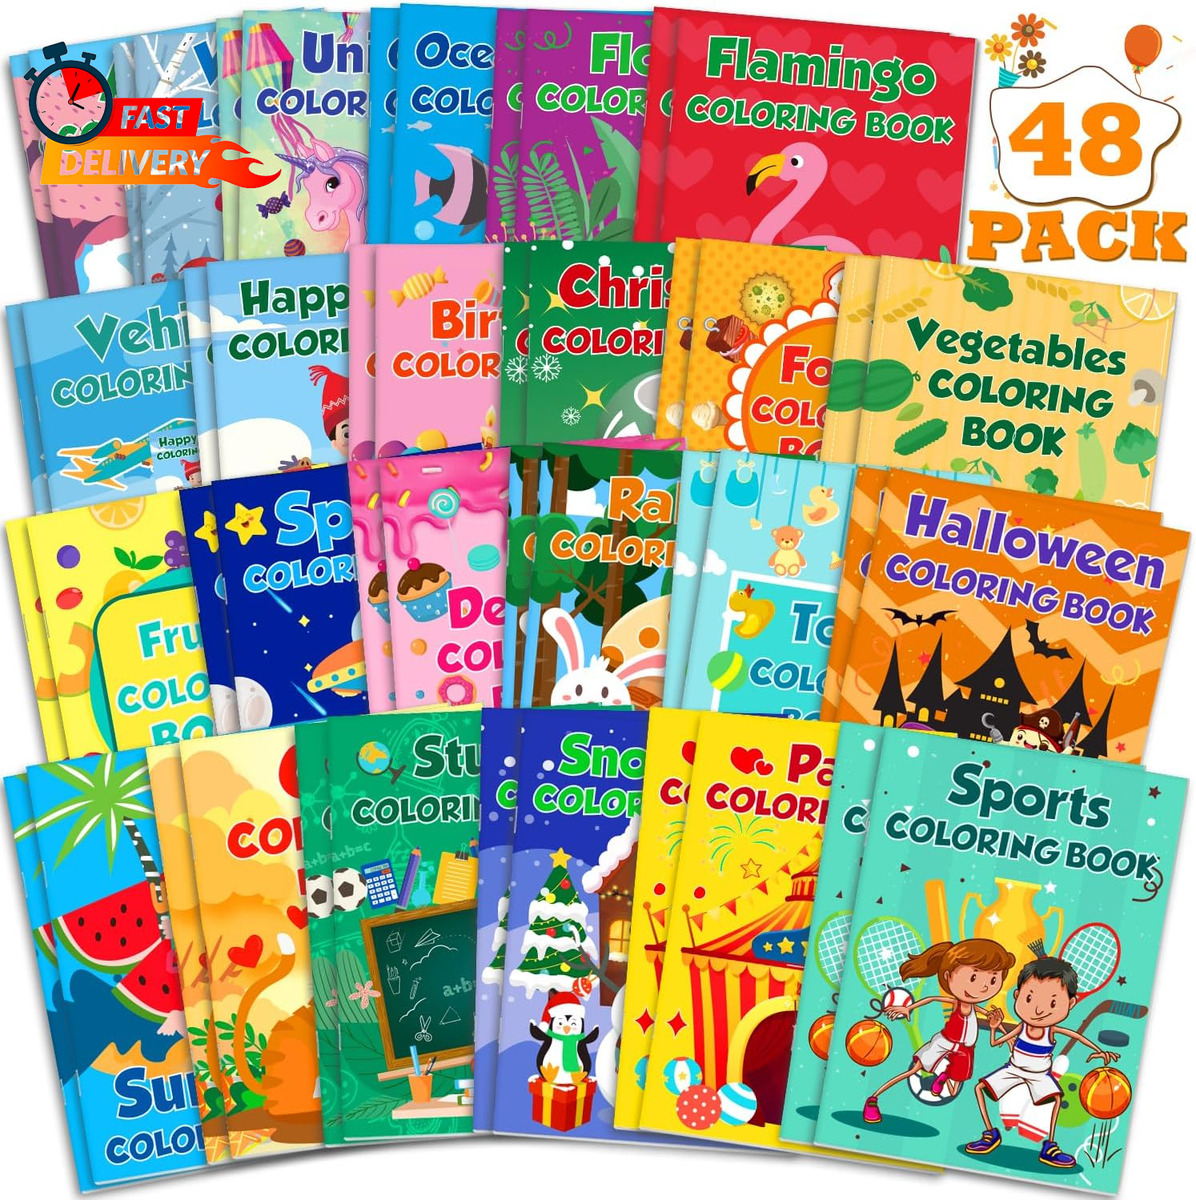  24 Pack Small Coloring Books for Kids Ages 4-8, 2-4